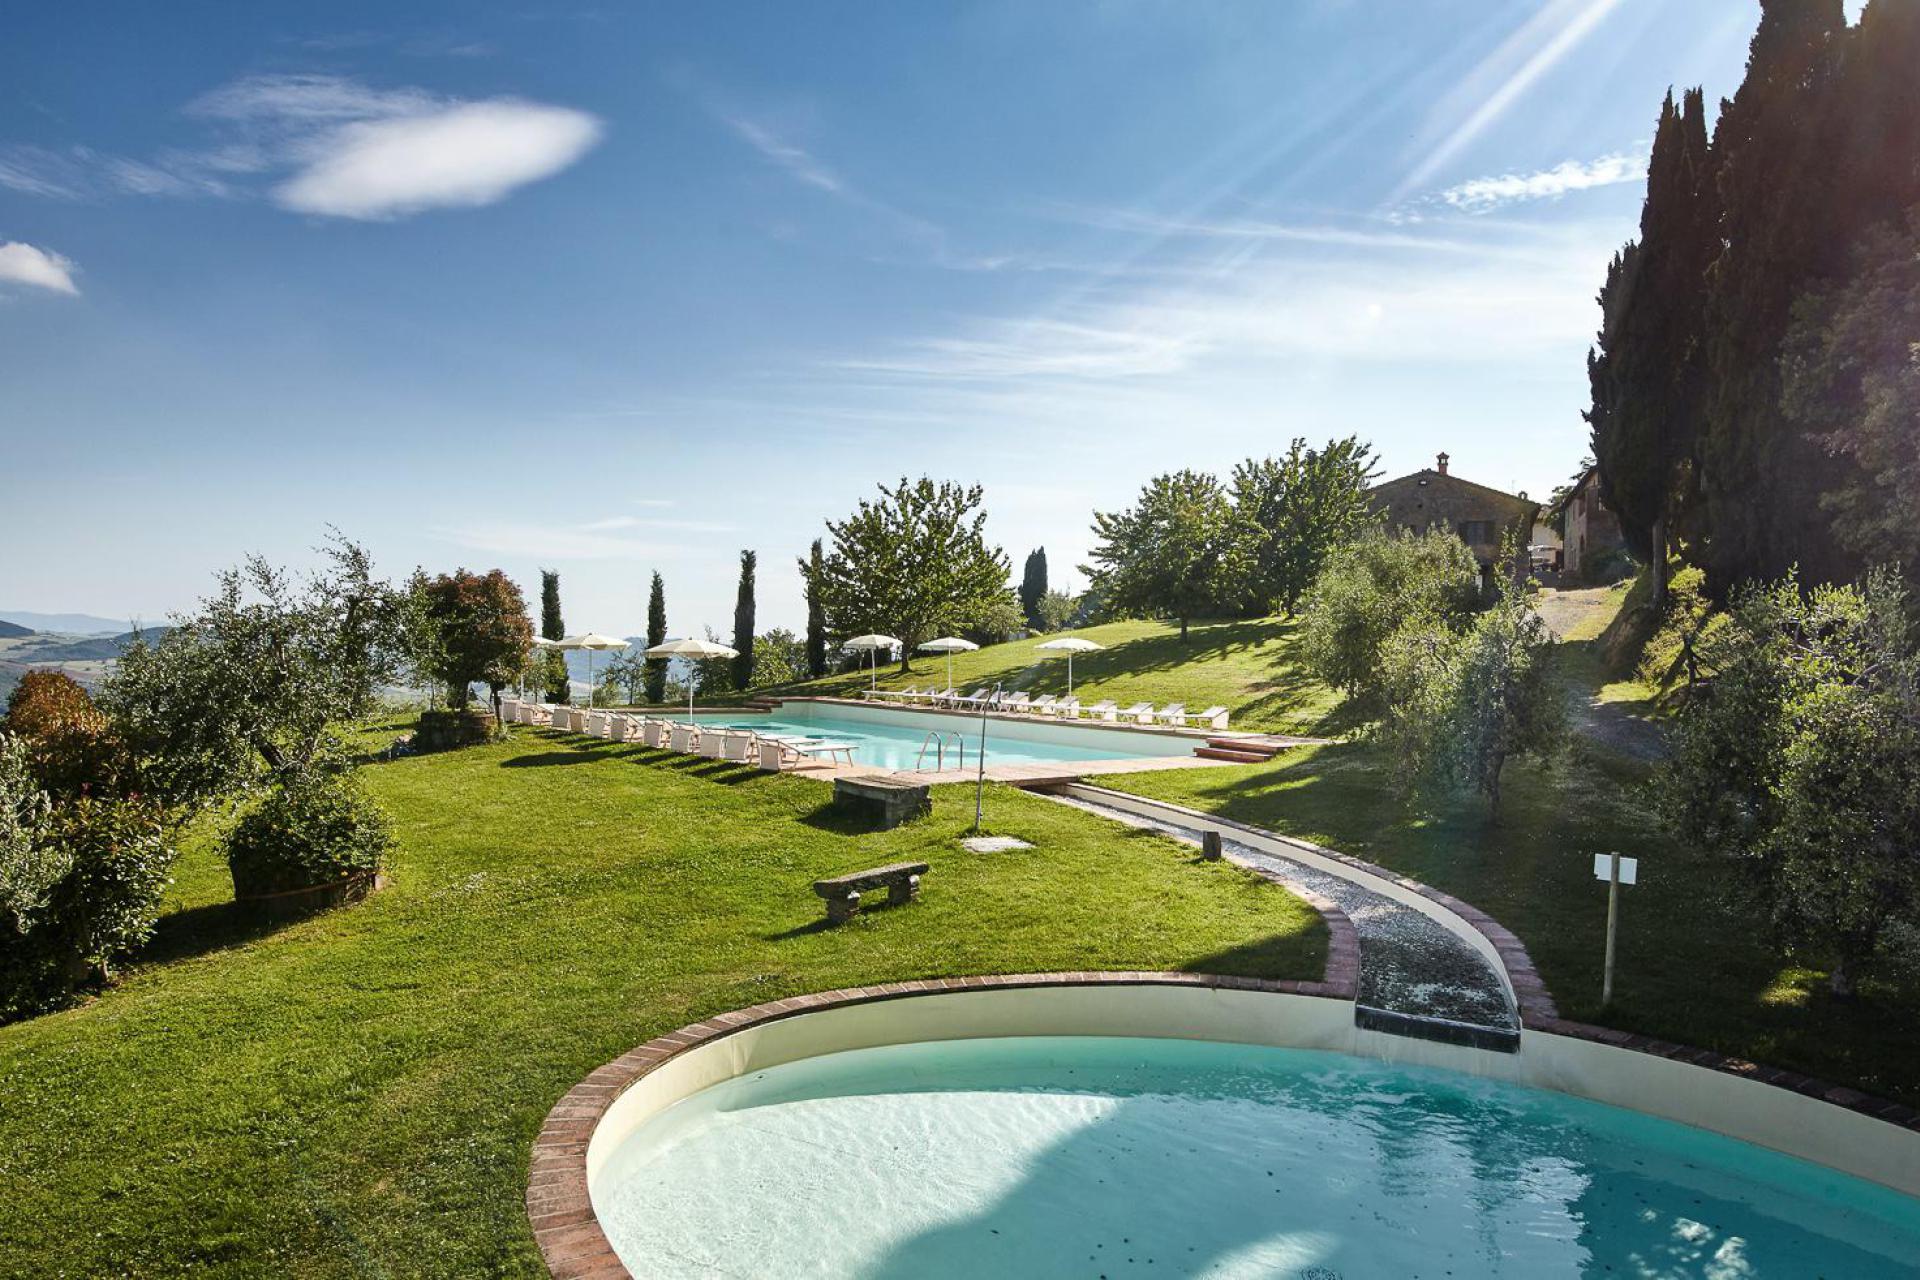 Agriturismo with pool and children’s pool